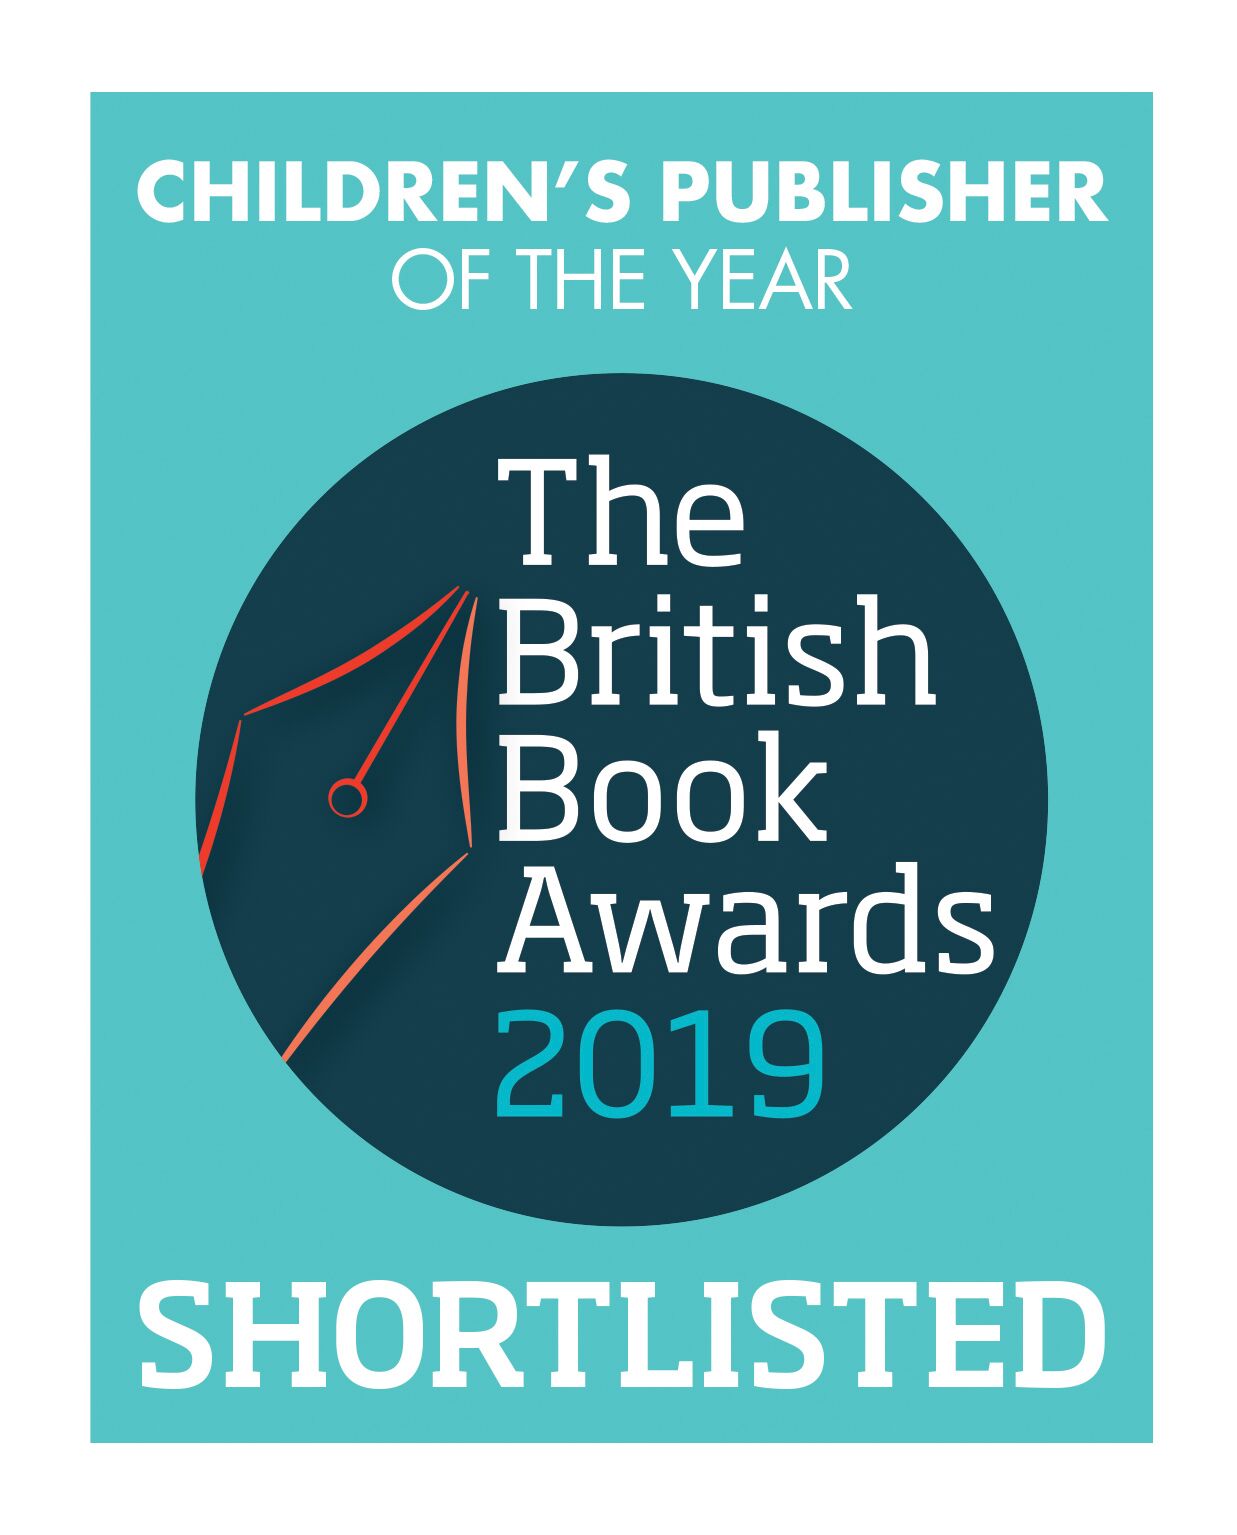 Children's Publisher of the Year – The British Book Awards 2019